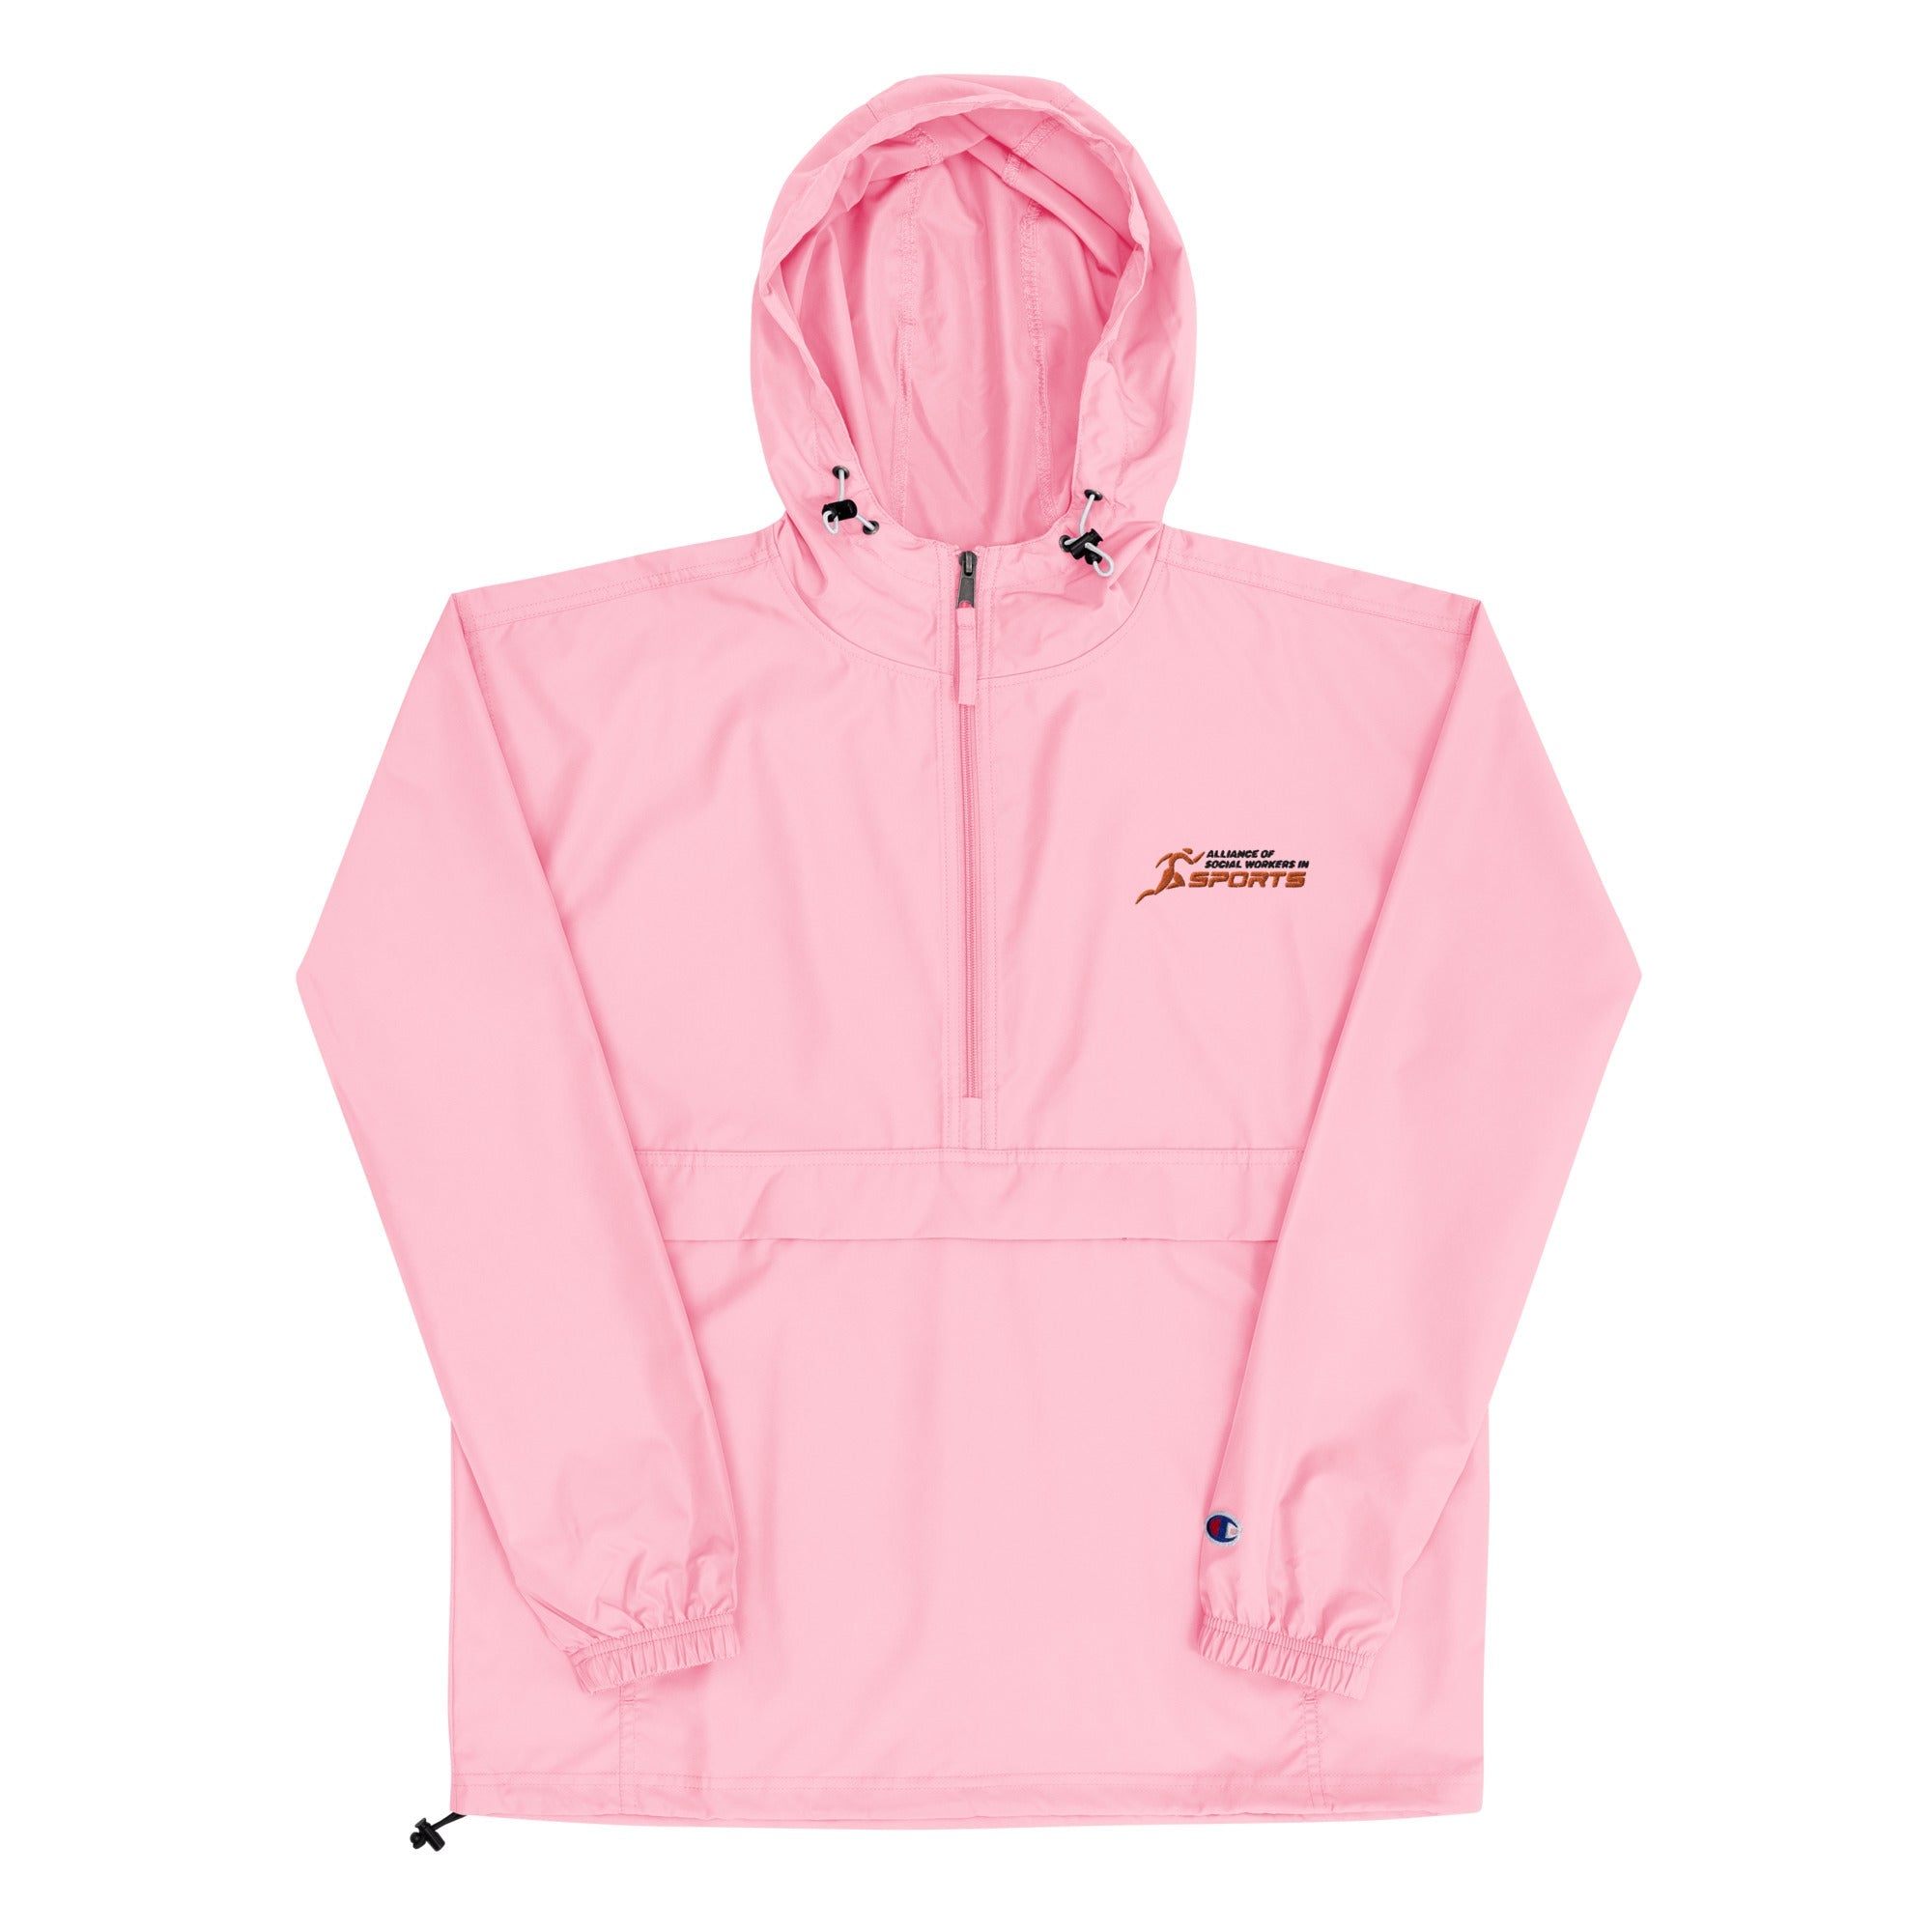 ASWIS Embroidered Champion Packable Jacket